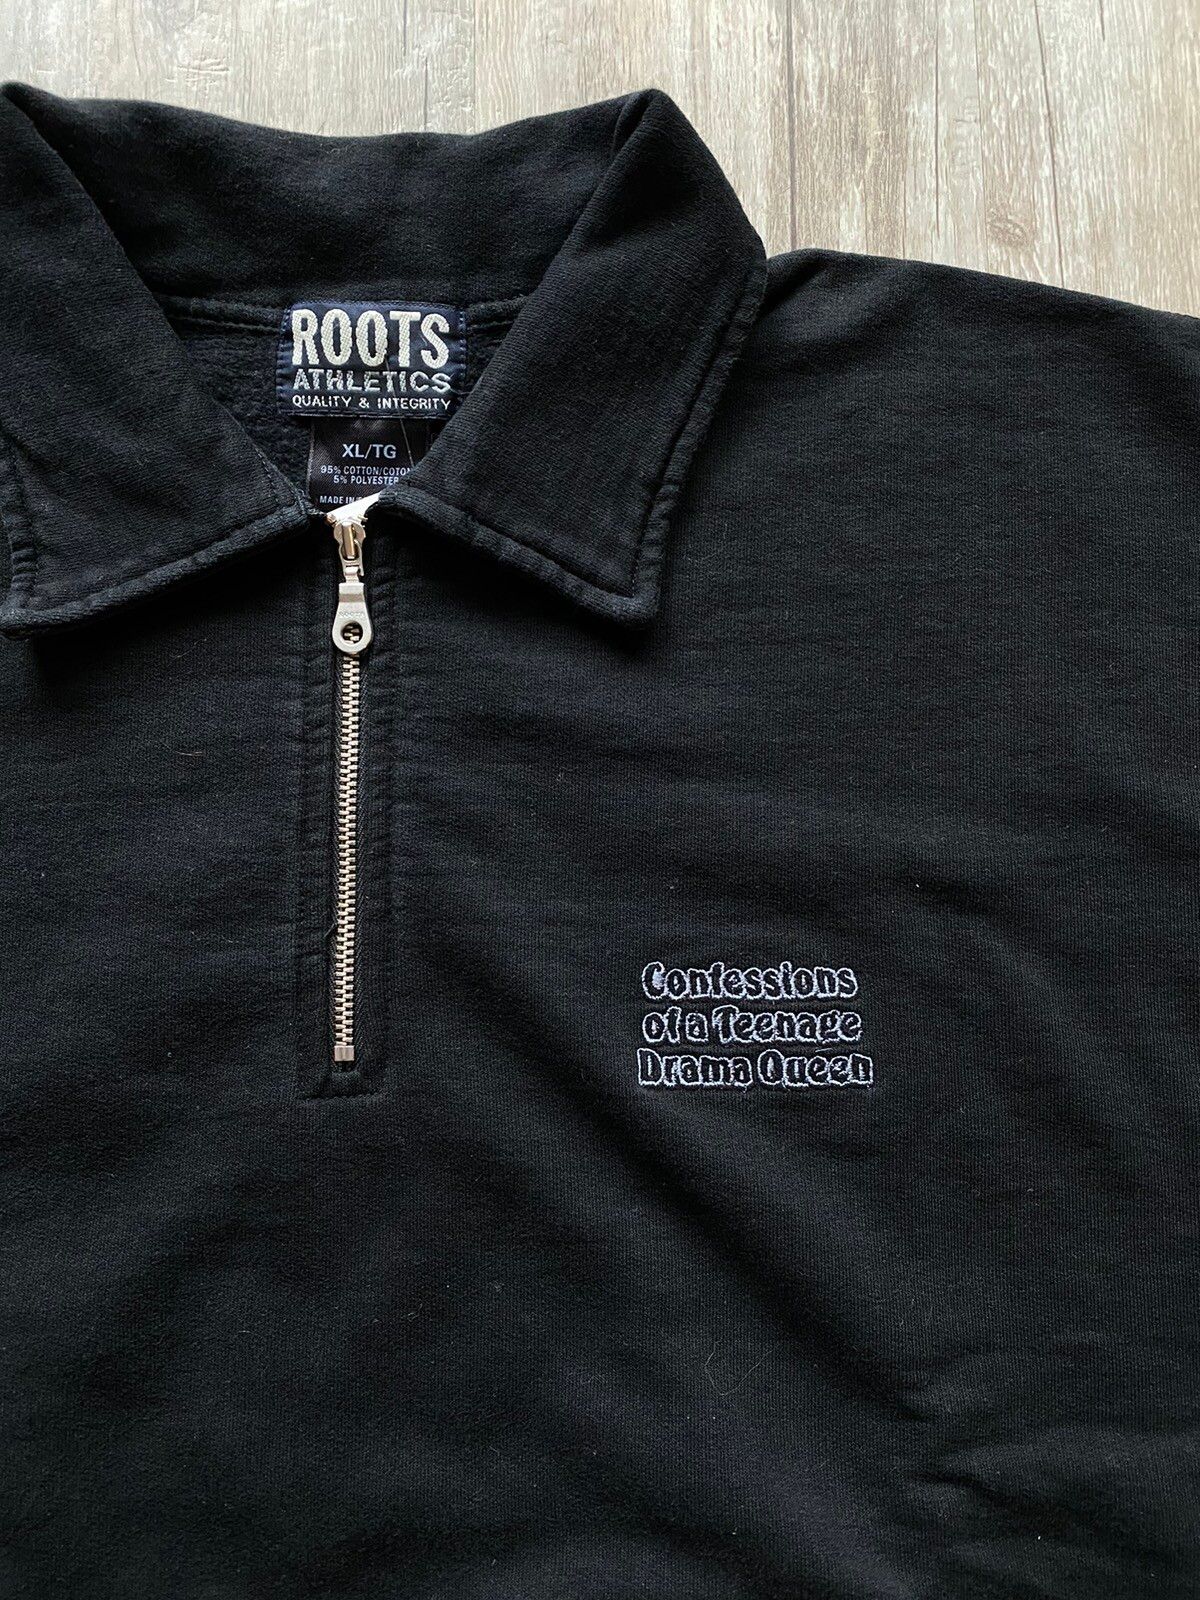 Vintage 90s Roots Confessions Of a Teenage Drama Queen Quarter Zip Size US XL / EU 56 / 4 - 2 Preview